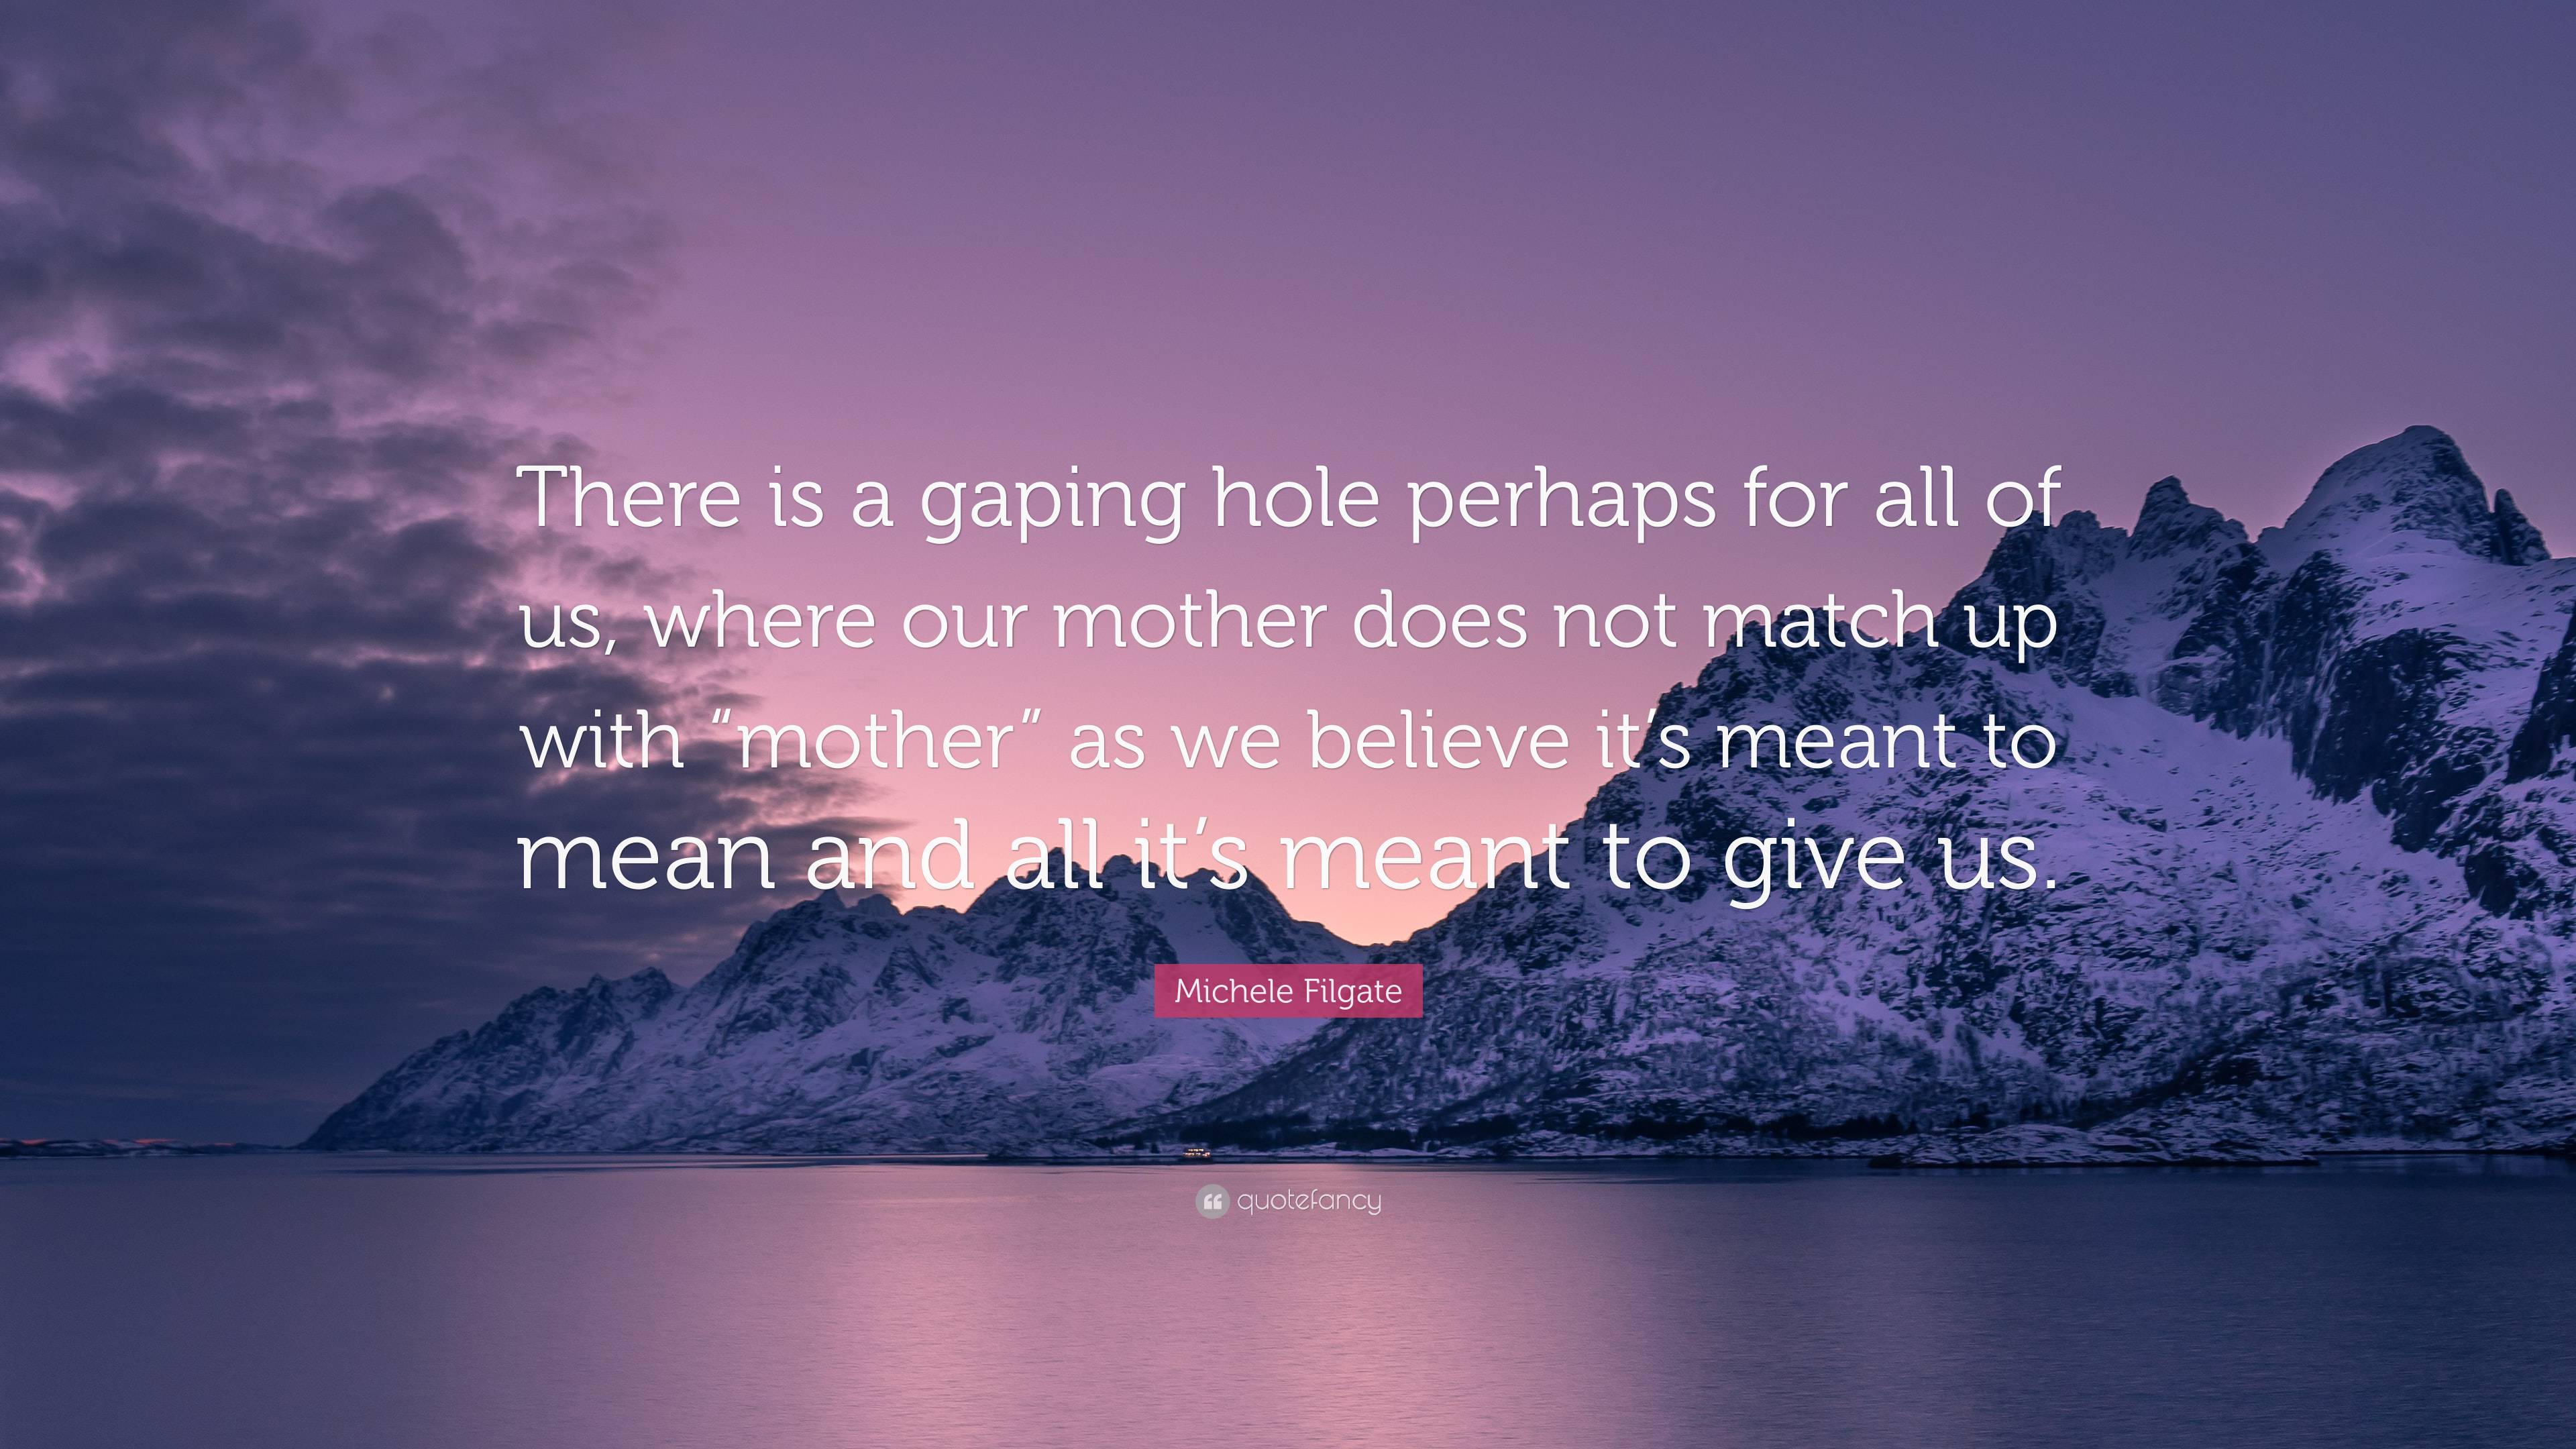 Michele Filgate Quote: “There is a gaping hole perhaps for all of